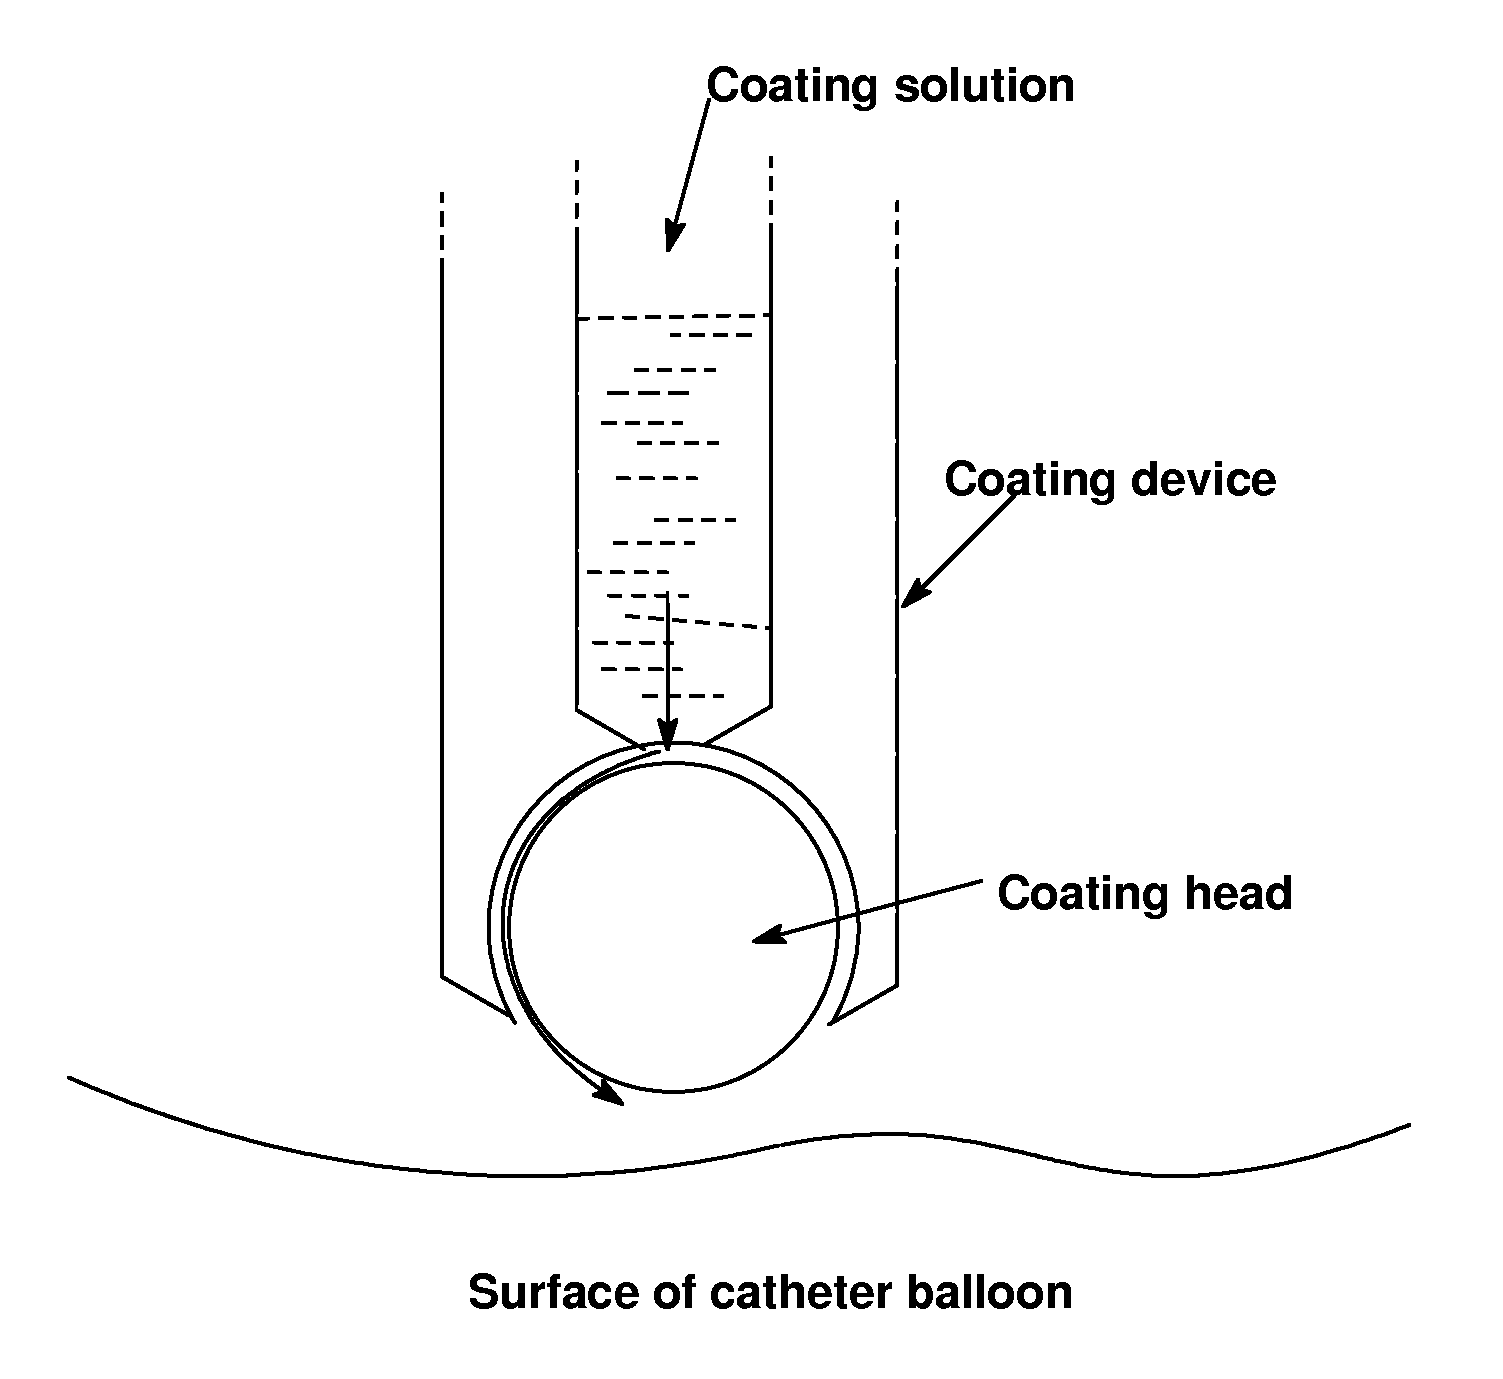 Use of compositions to coat catheter balloons and coated catheter balloons